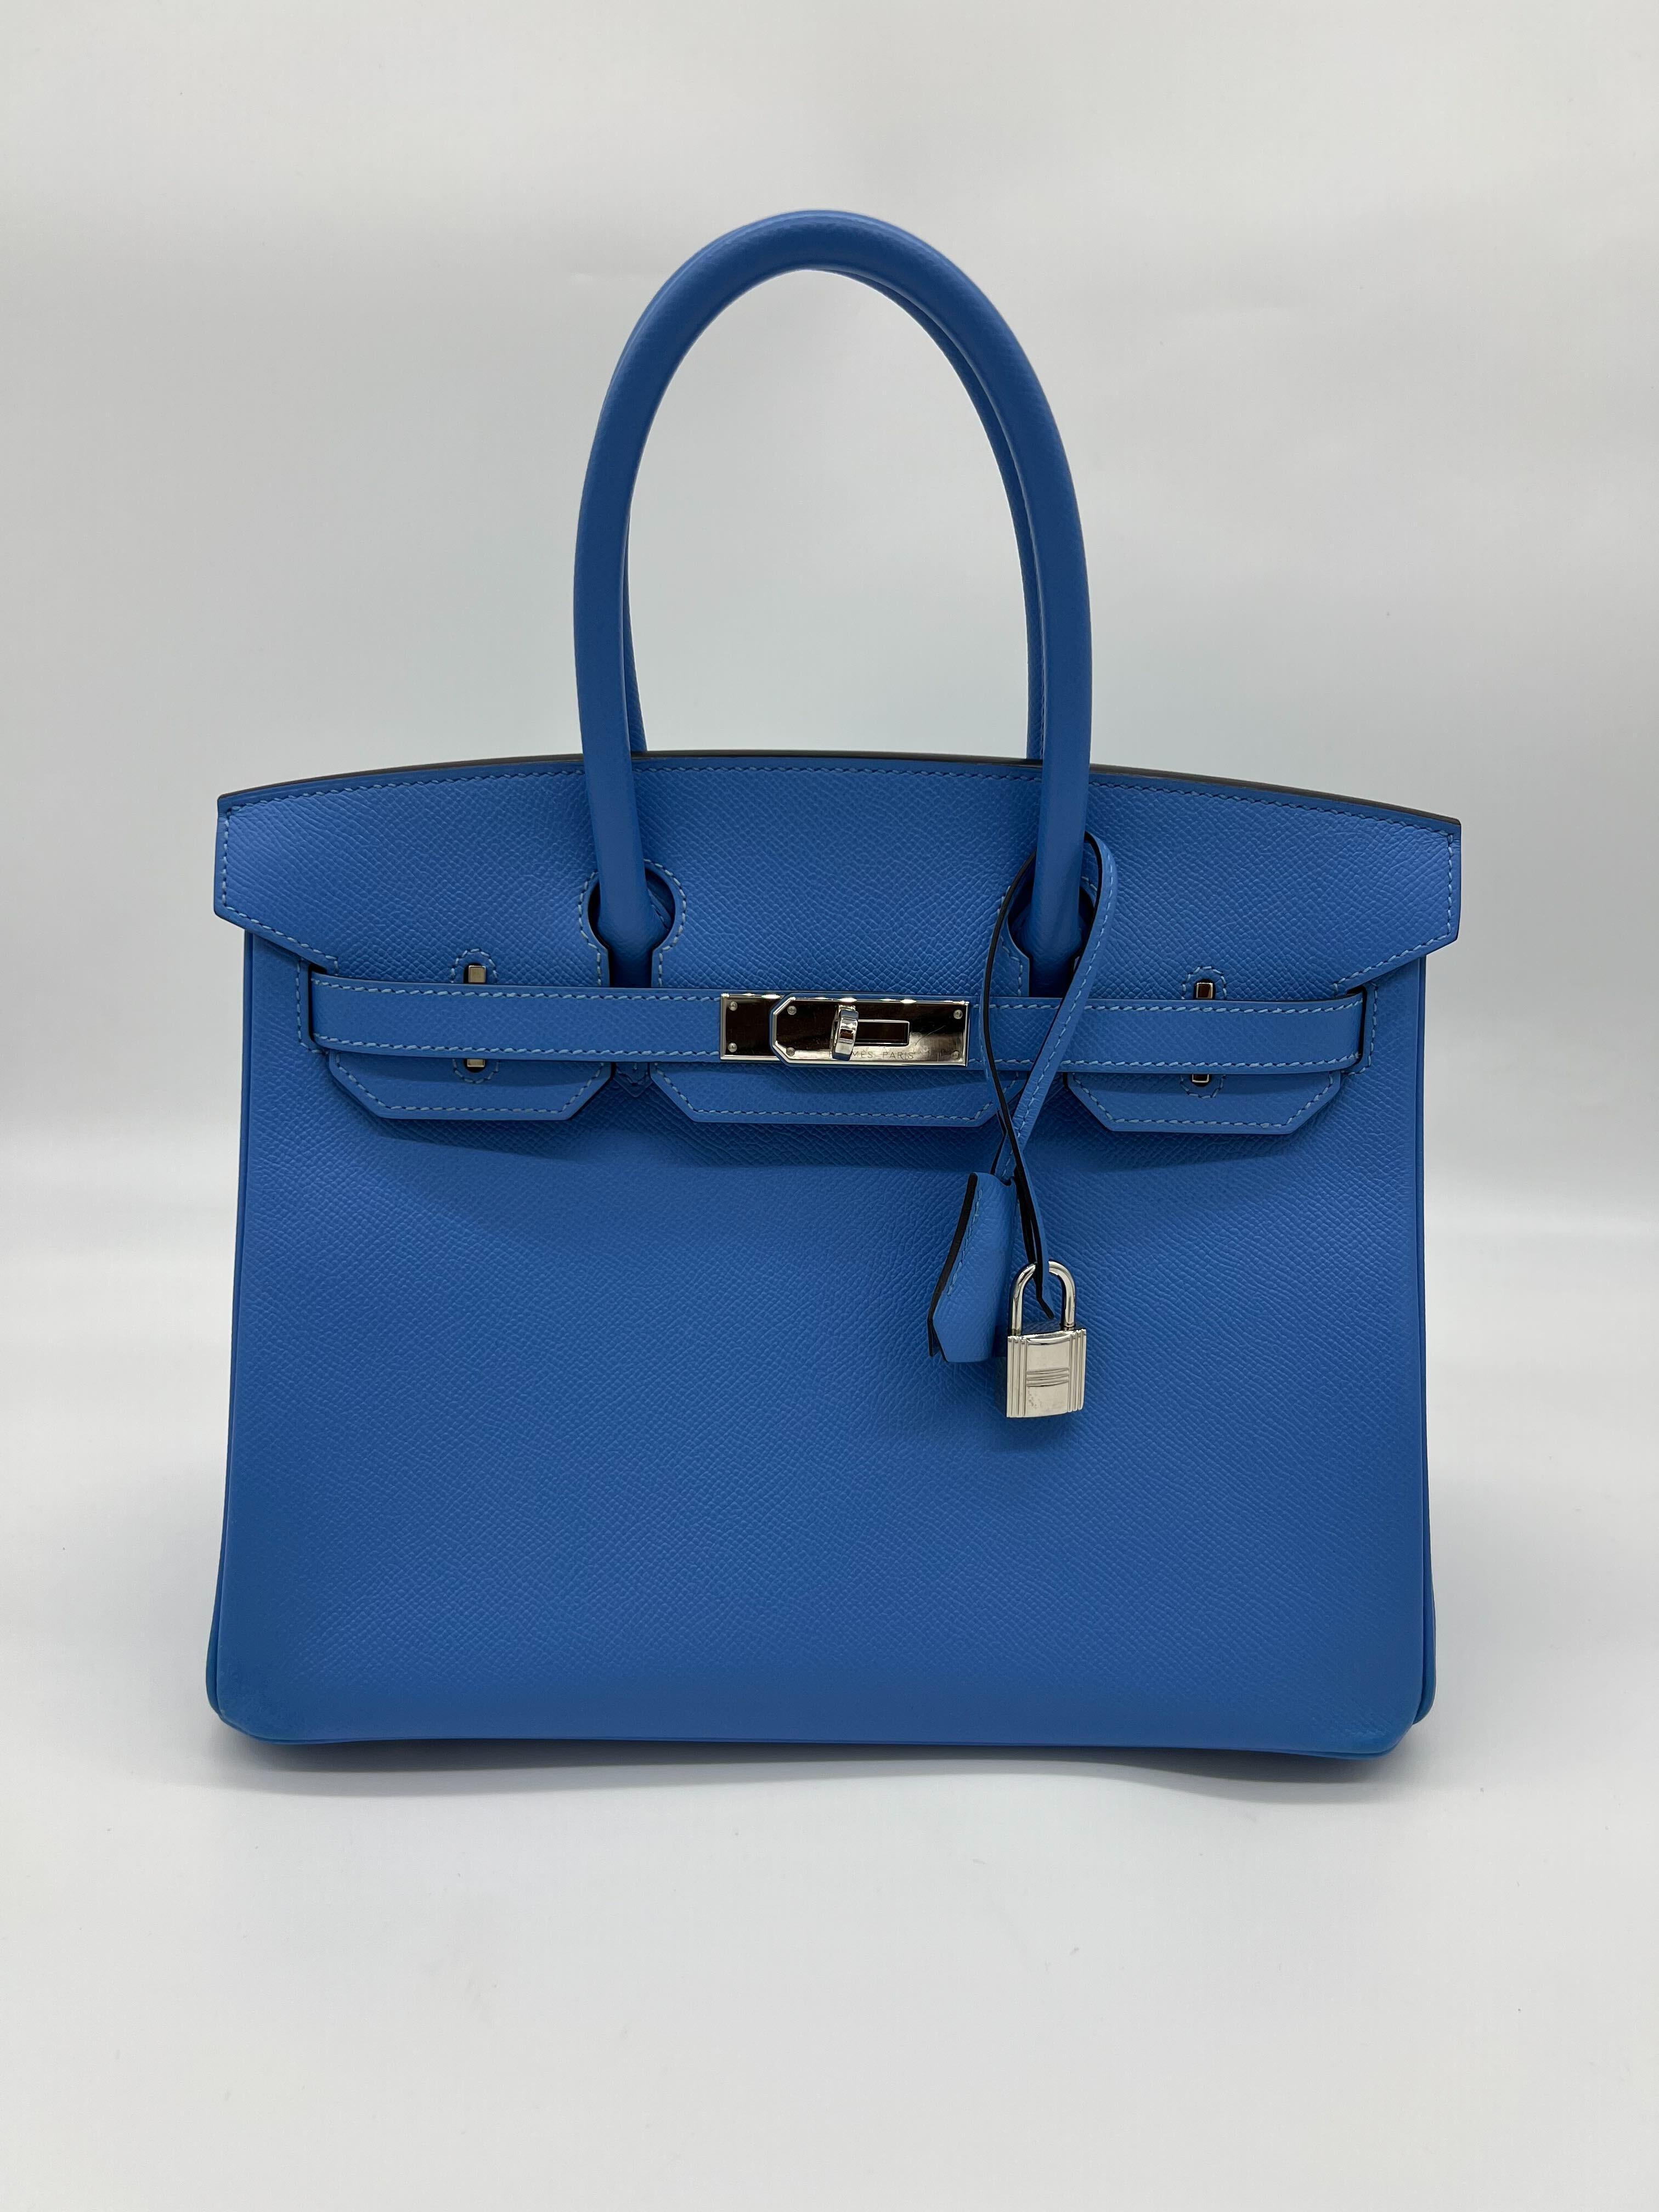 Hermès Birkin 30 Veau Epsom Leather 2T Bleu Paradis Palladium Hardware

Condition: Pre-owned (like new)
Material: Epsom Leather
Measurements: 11.5” W x 9” H x 6” D
Hardware: Palladium

*Comes with full original packaging, missing original receipt.